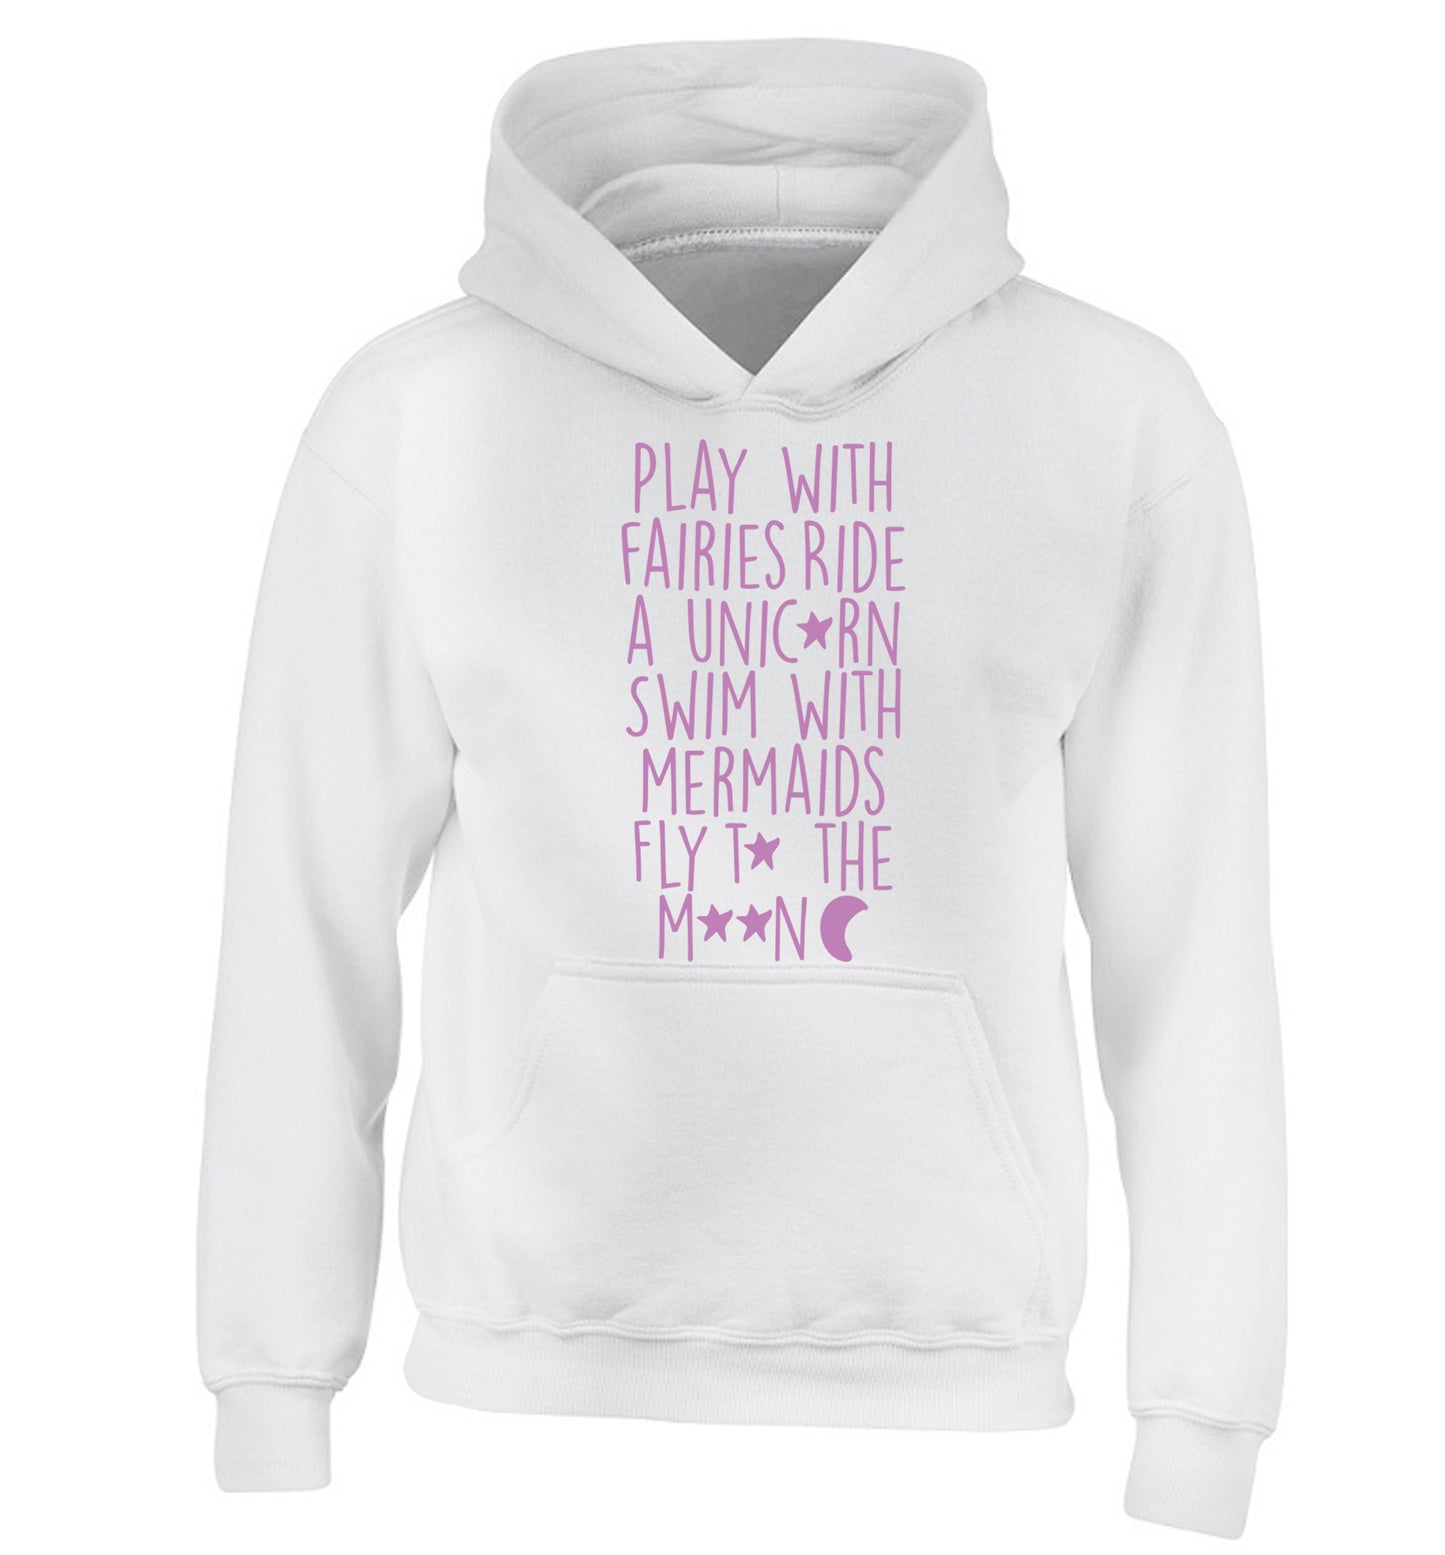 Play with fairies ride a unicorn swim with mermaids fly to the moon children's white hoodie 12-14 Years